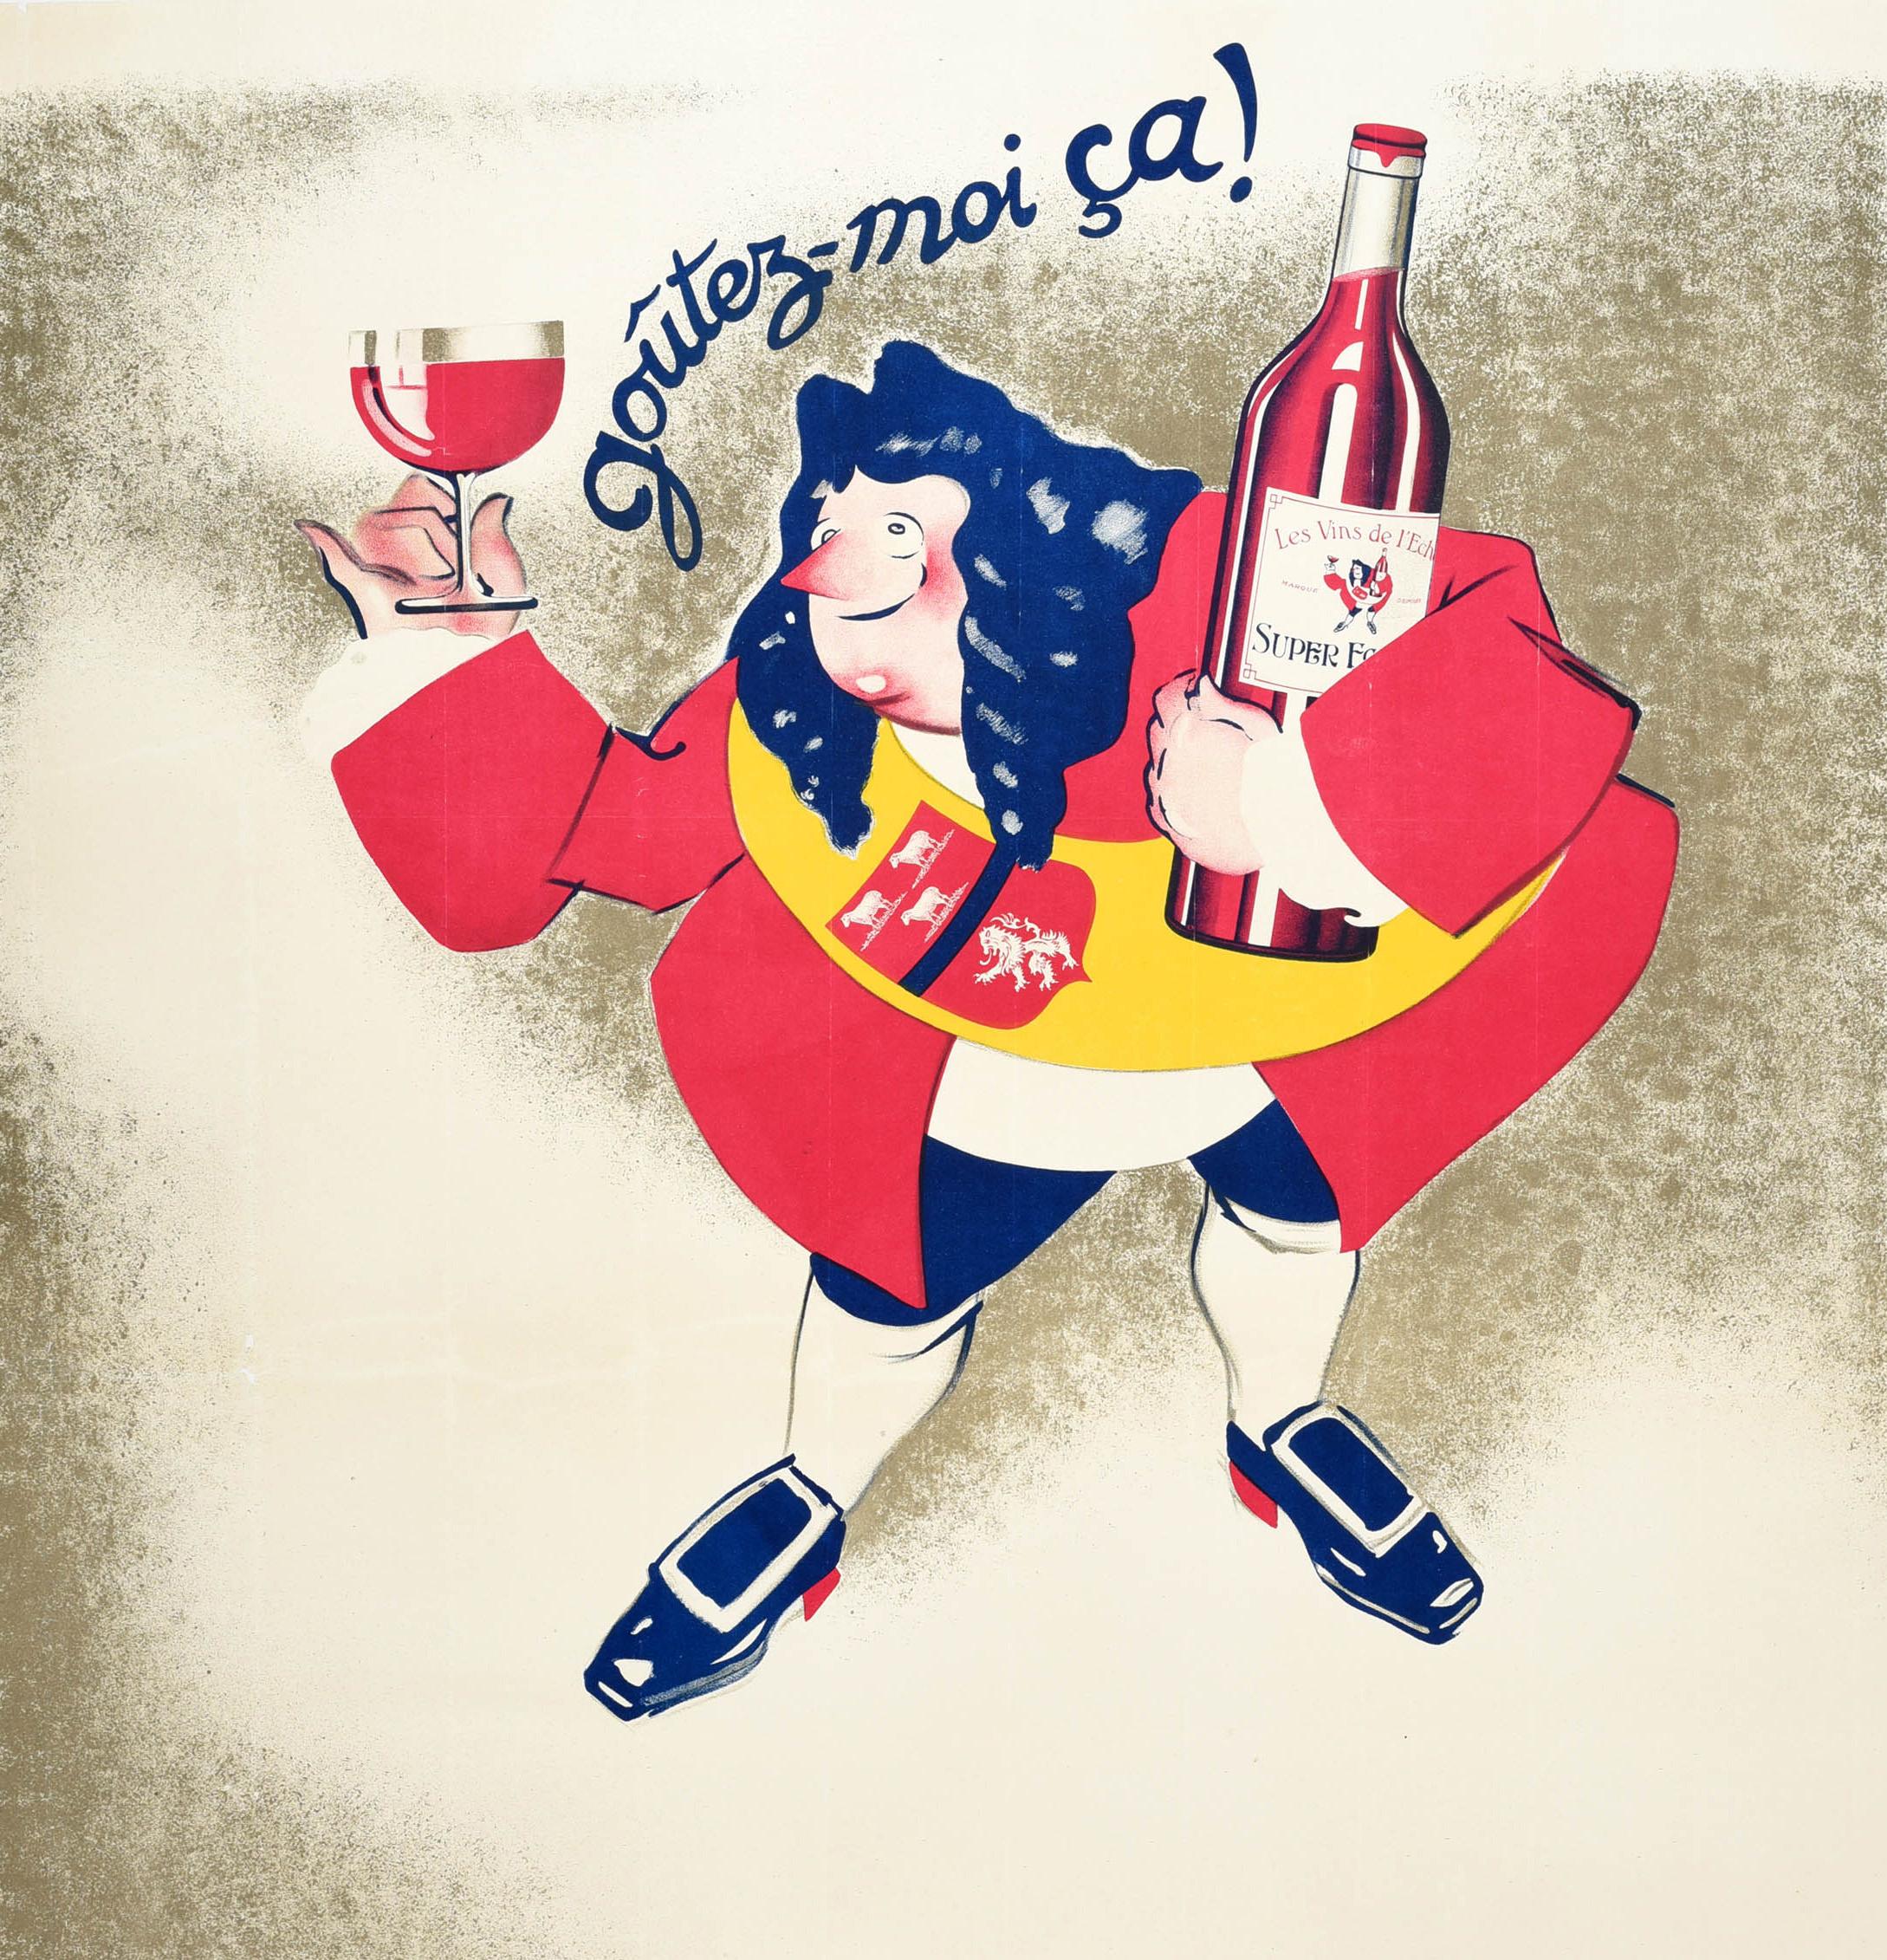 Original vintage drink advertising poster for Echanson Wines / Les Vins De L'Echanson featuring a fun design depicting a smiling man holding a large bottle of wine in one arm and holding up a glass of red wine in his other hand, the stylised text